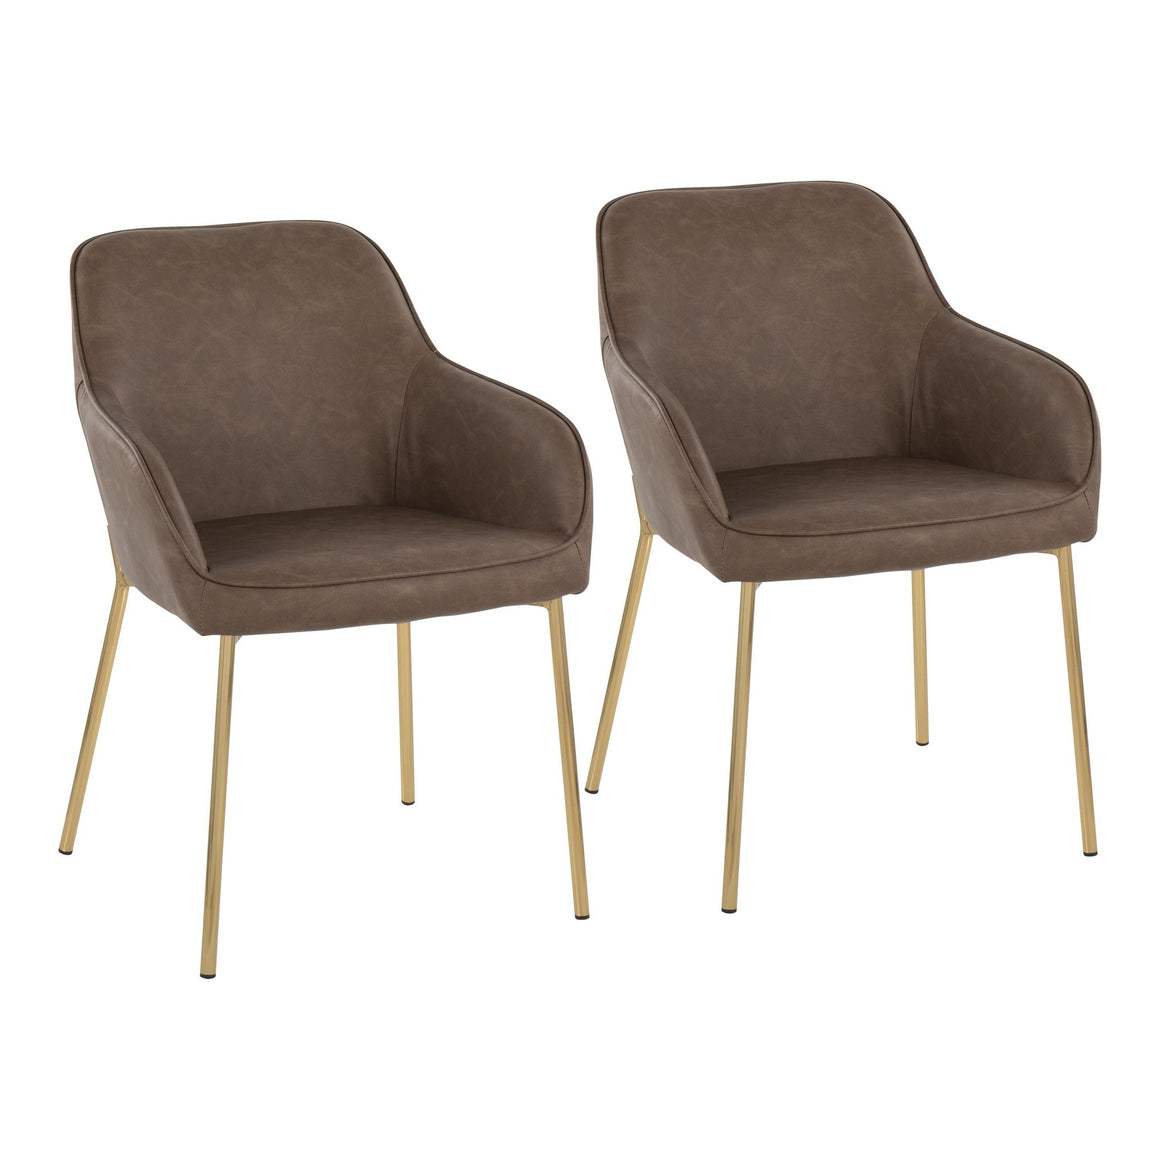 Daniella Contemporary Dining Chair in Gold Steel and Espresso Faux Leather by LumiSource - Set of 2